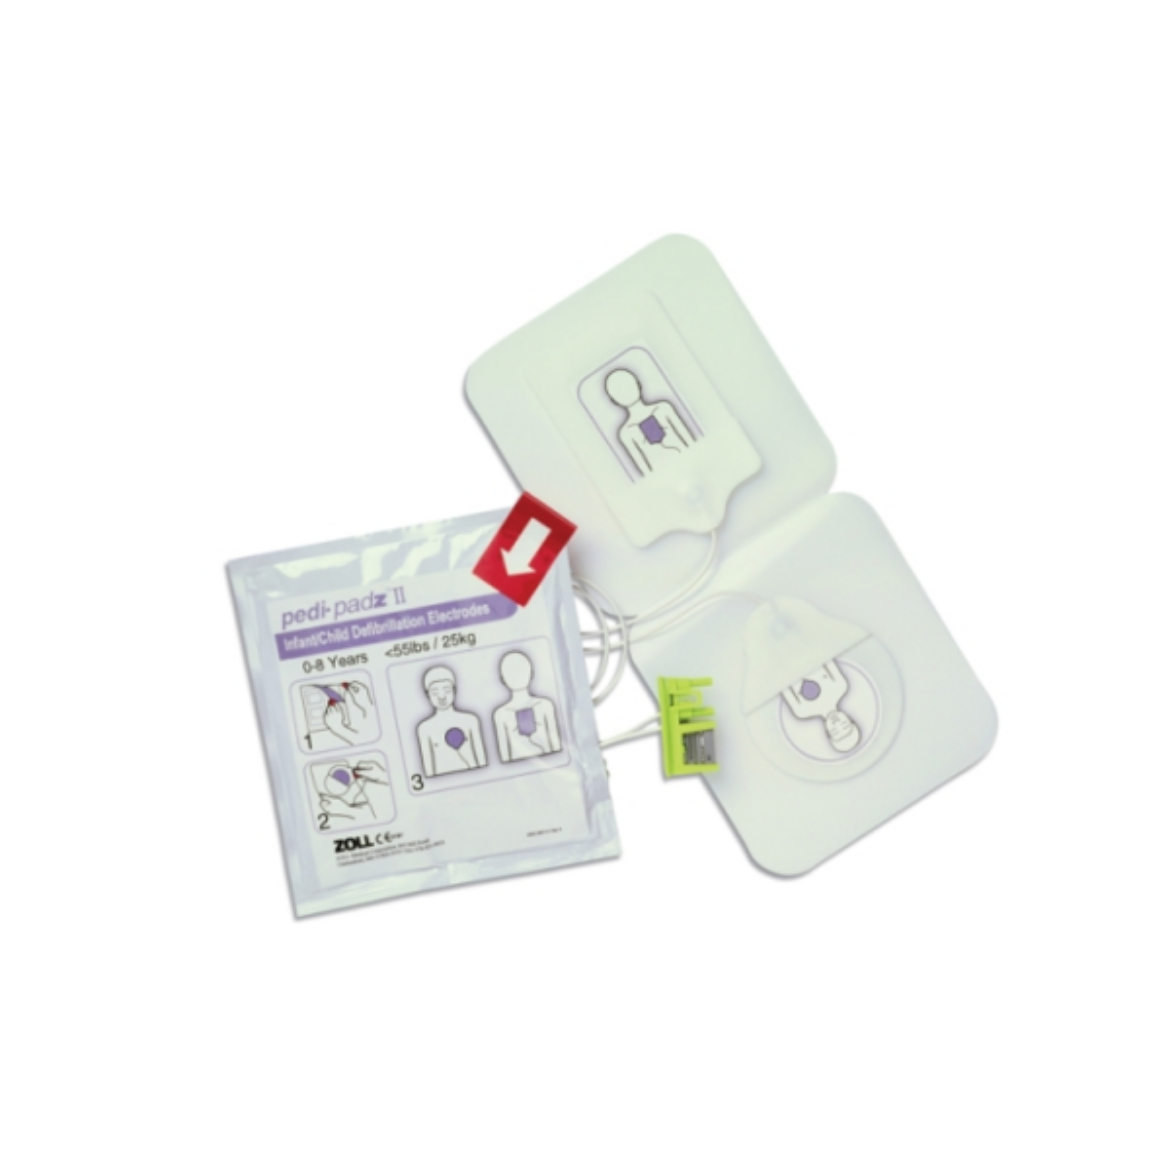 Picture of ZOLL PEDI-PADZ PAEDIATRIC DEFIBRILLATION PADS FOR ZOLL AED PLUS